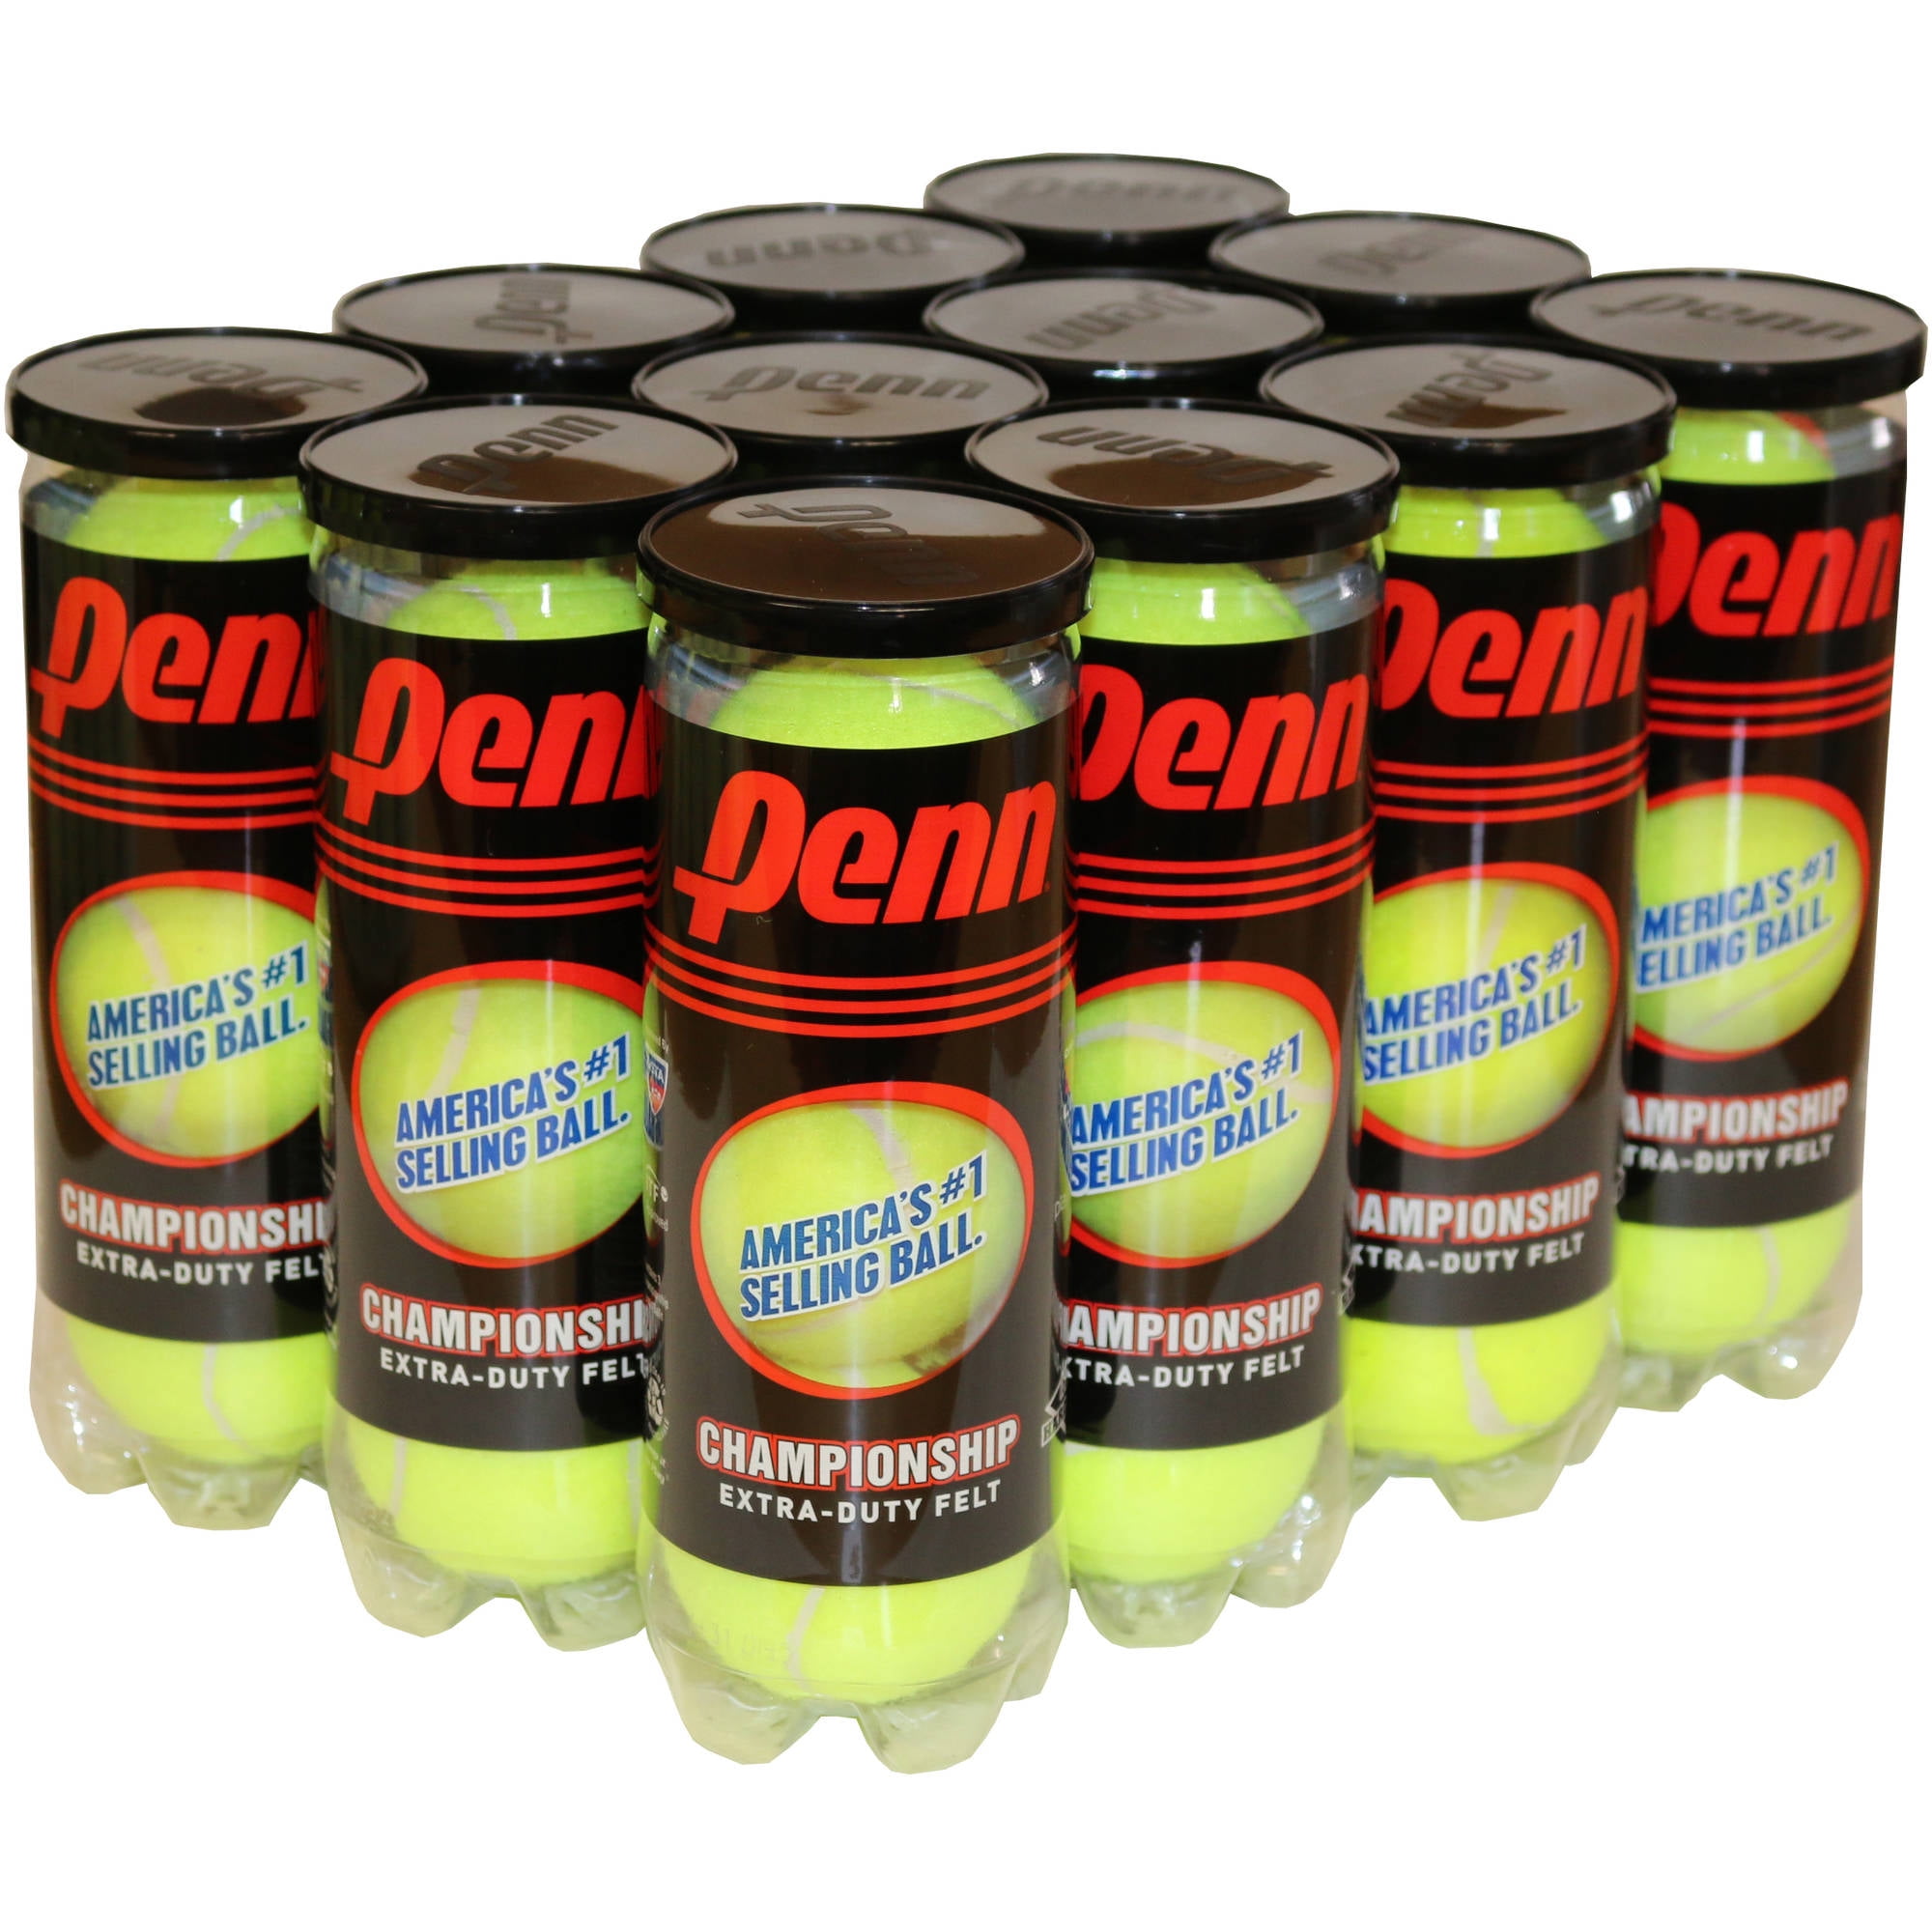 Natural Rubber for consistent Play Official Ball of The United States Tennis Association Leagues Yellow Penn High Altitude Tennis Balls Championship USTA & ITF Approved 